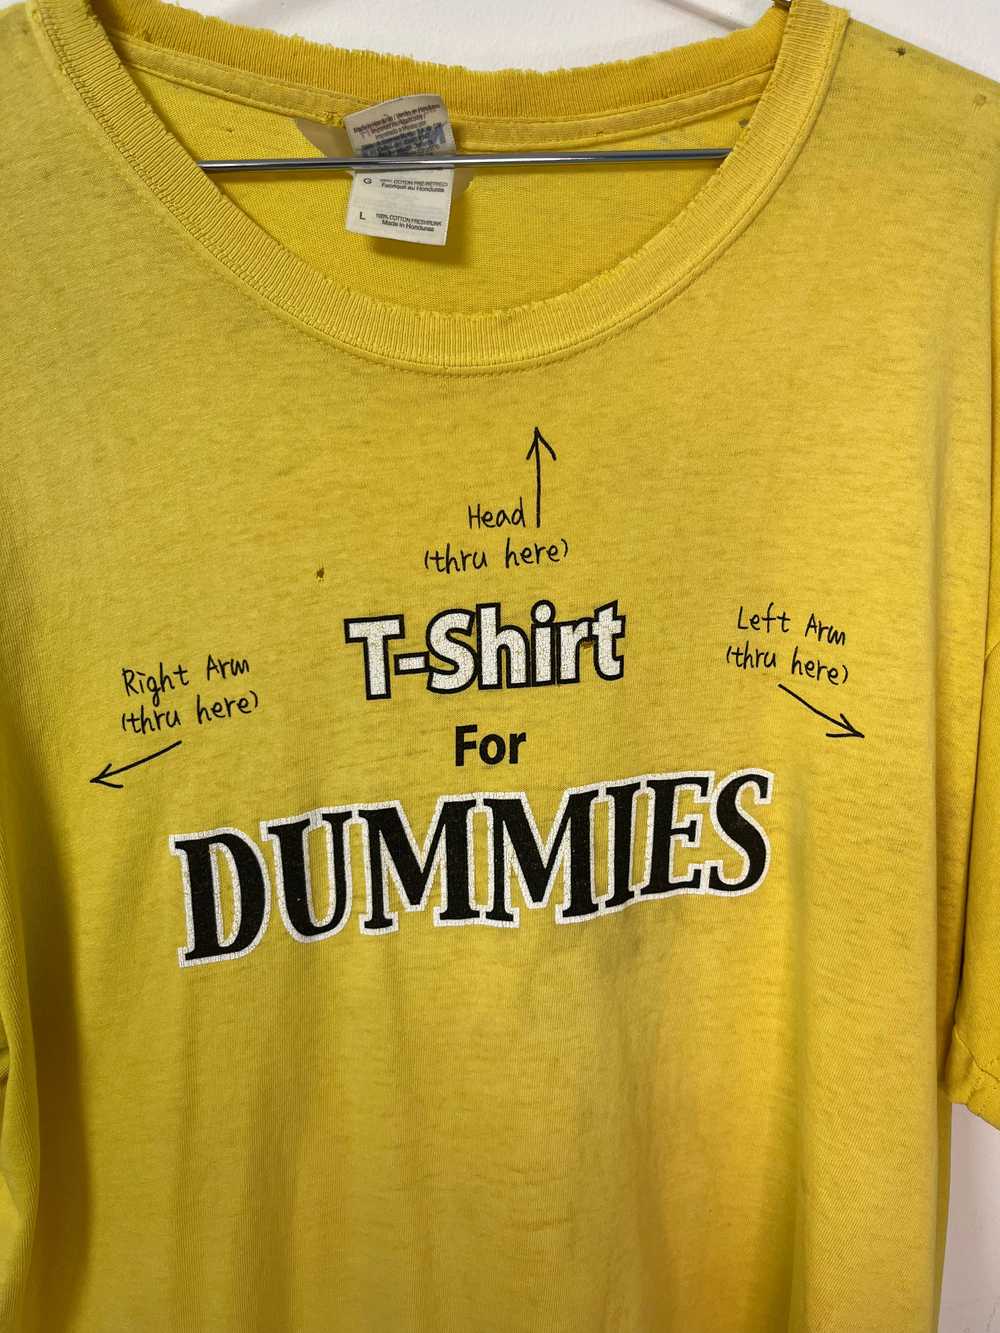 90s T-Shirt For Dummies Humor T-Shirt - Aged Cana… - image 2